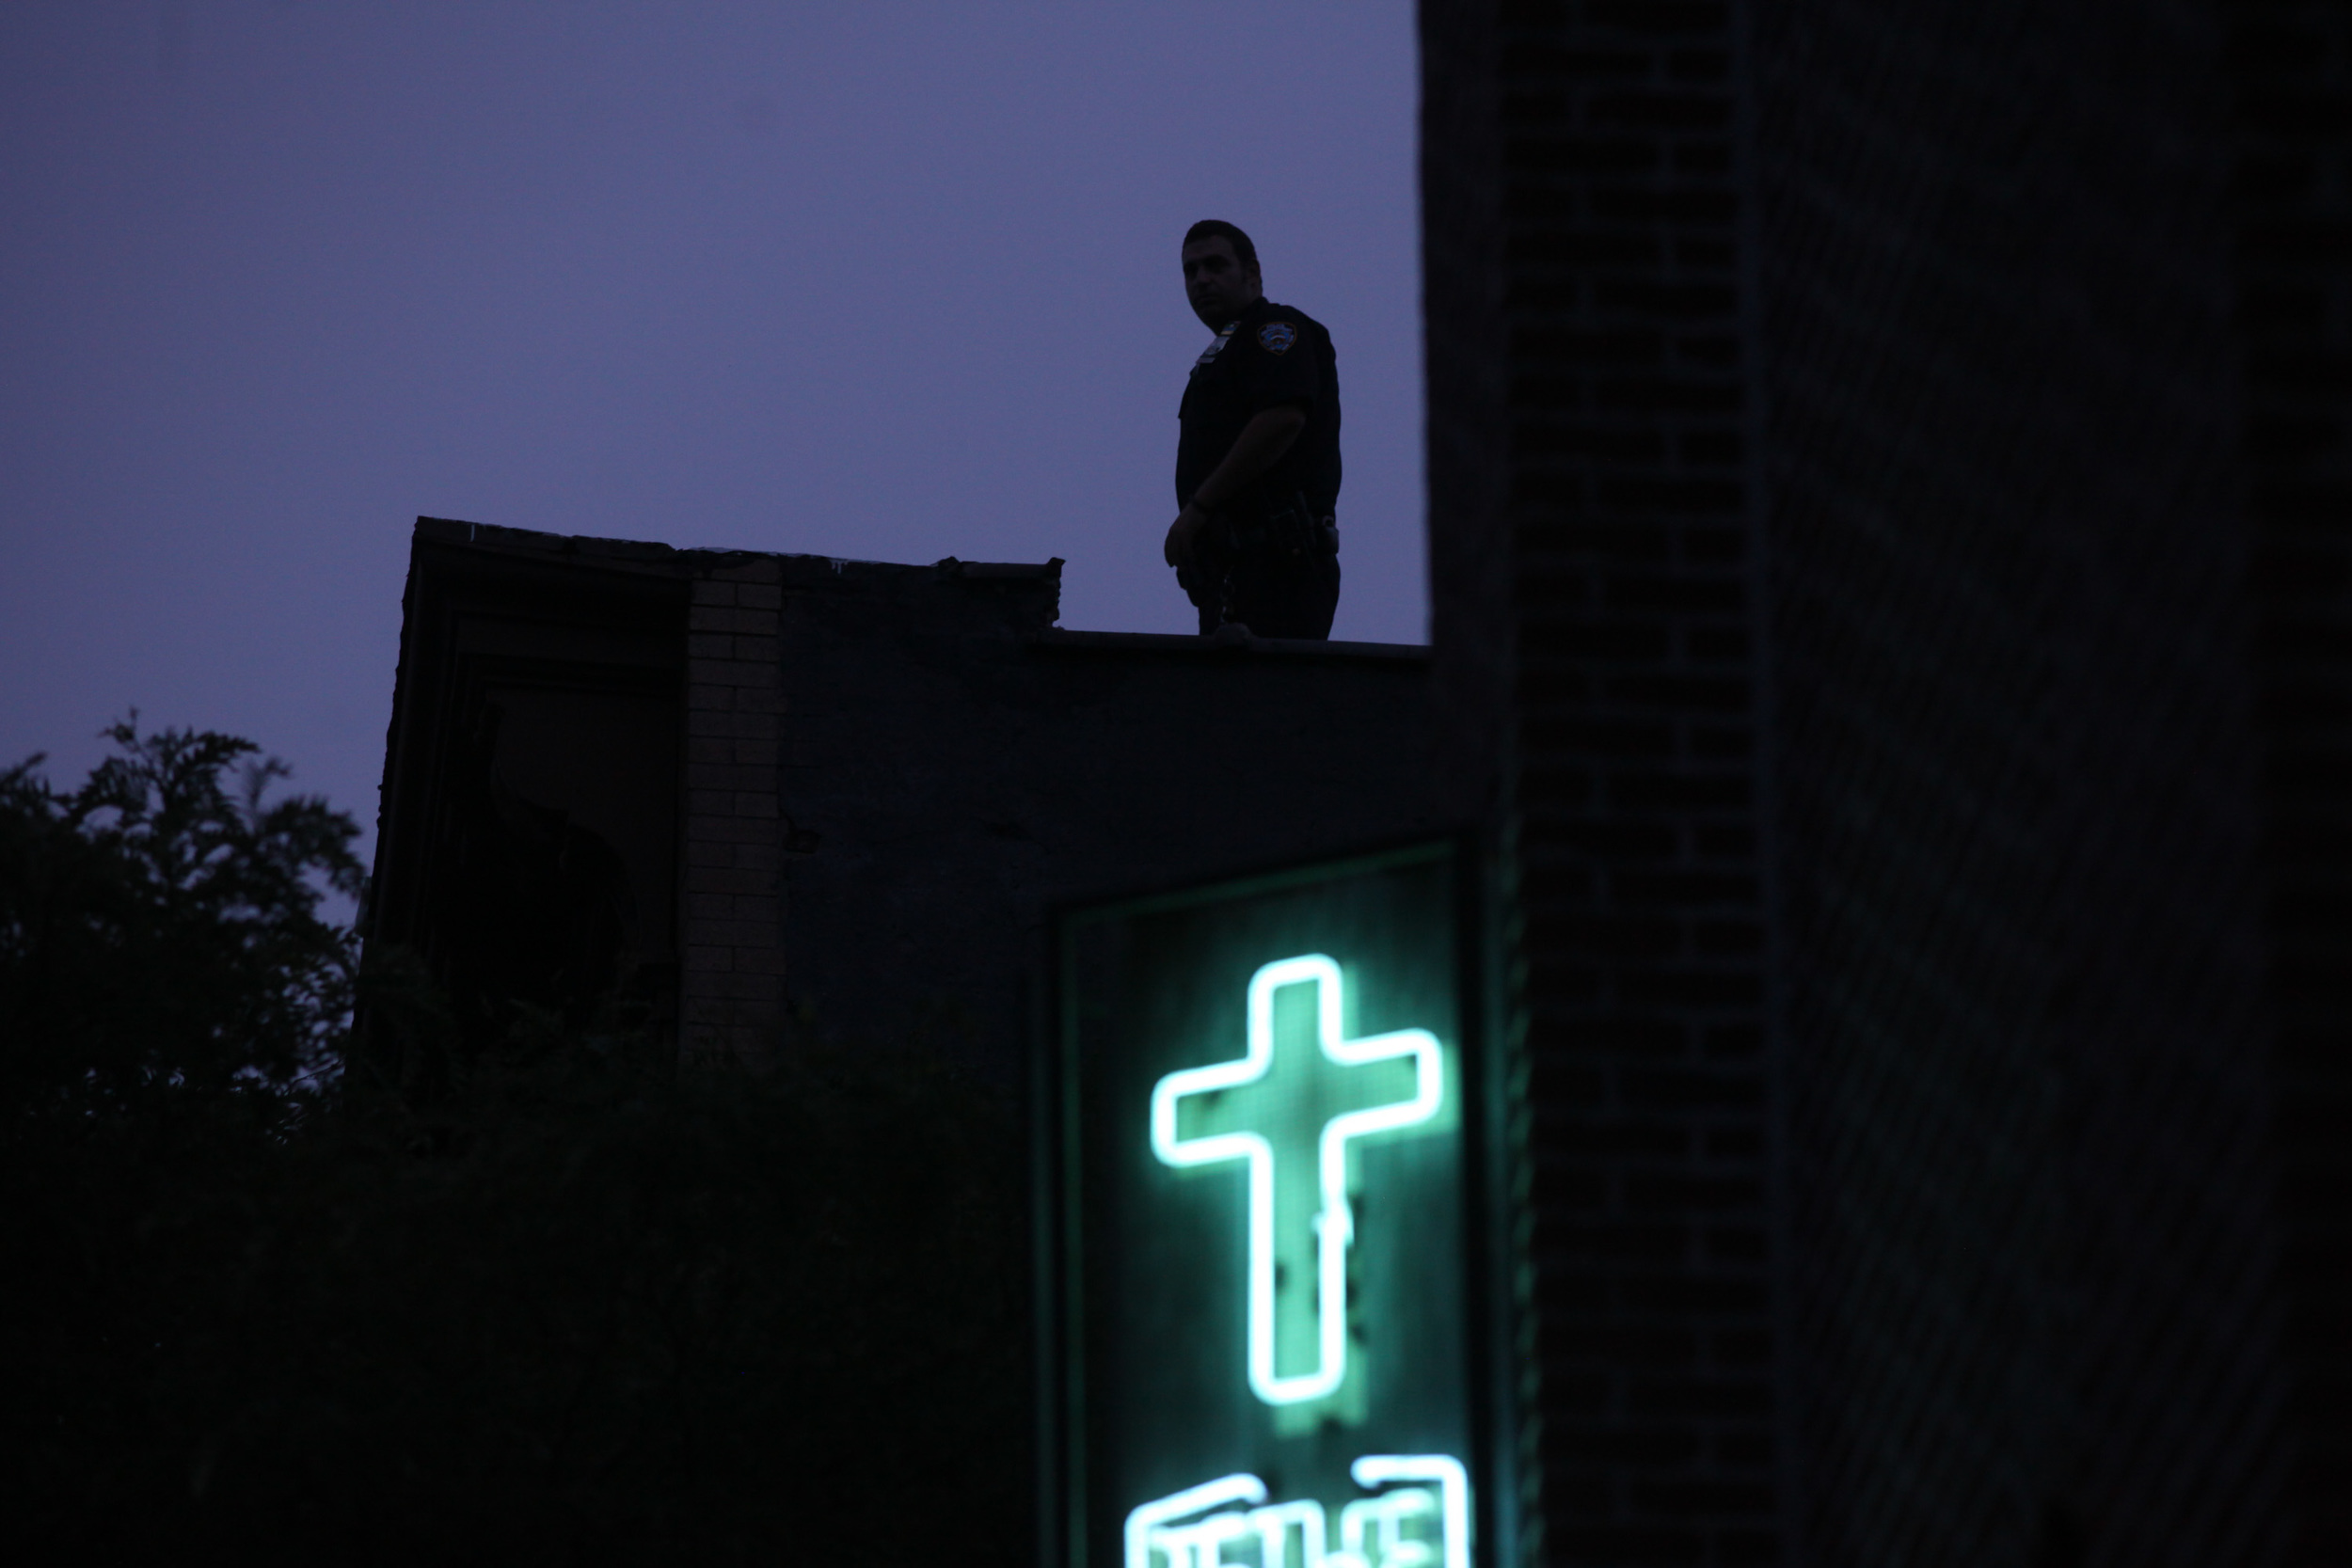  NYPD officer on a rooftop during the funeral for Eric Garner, who died after being placed in a chokehold by NYPD for selling loose cigarettes in Staten Island.&nbsp; 